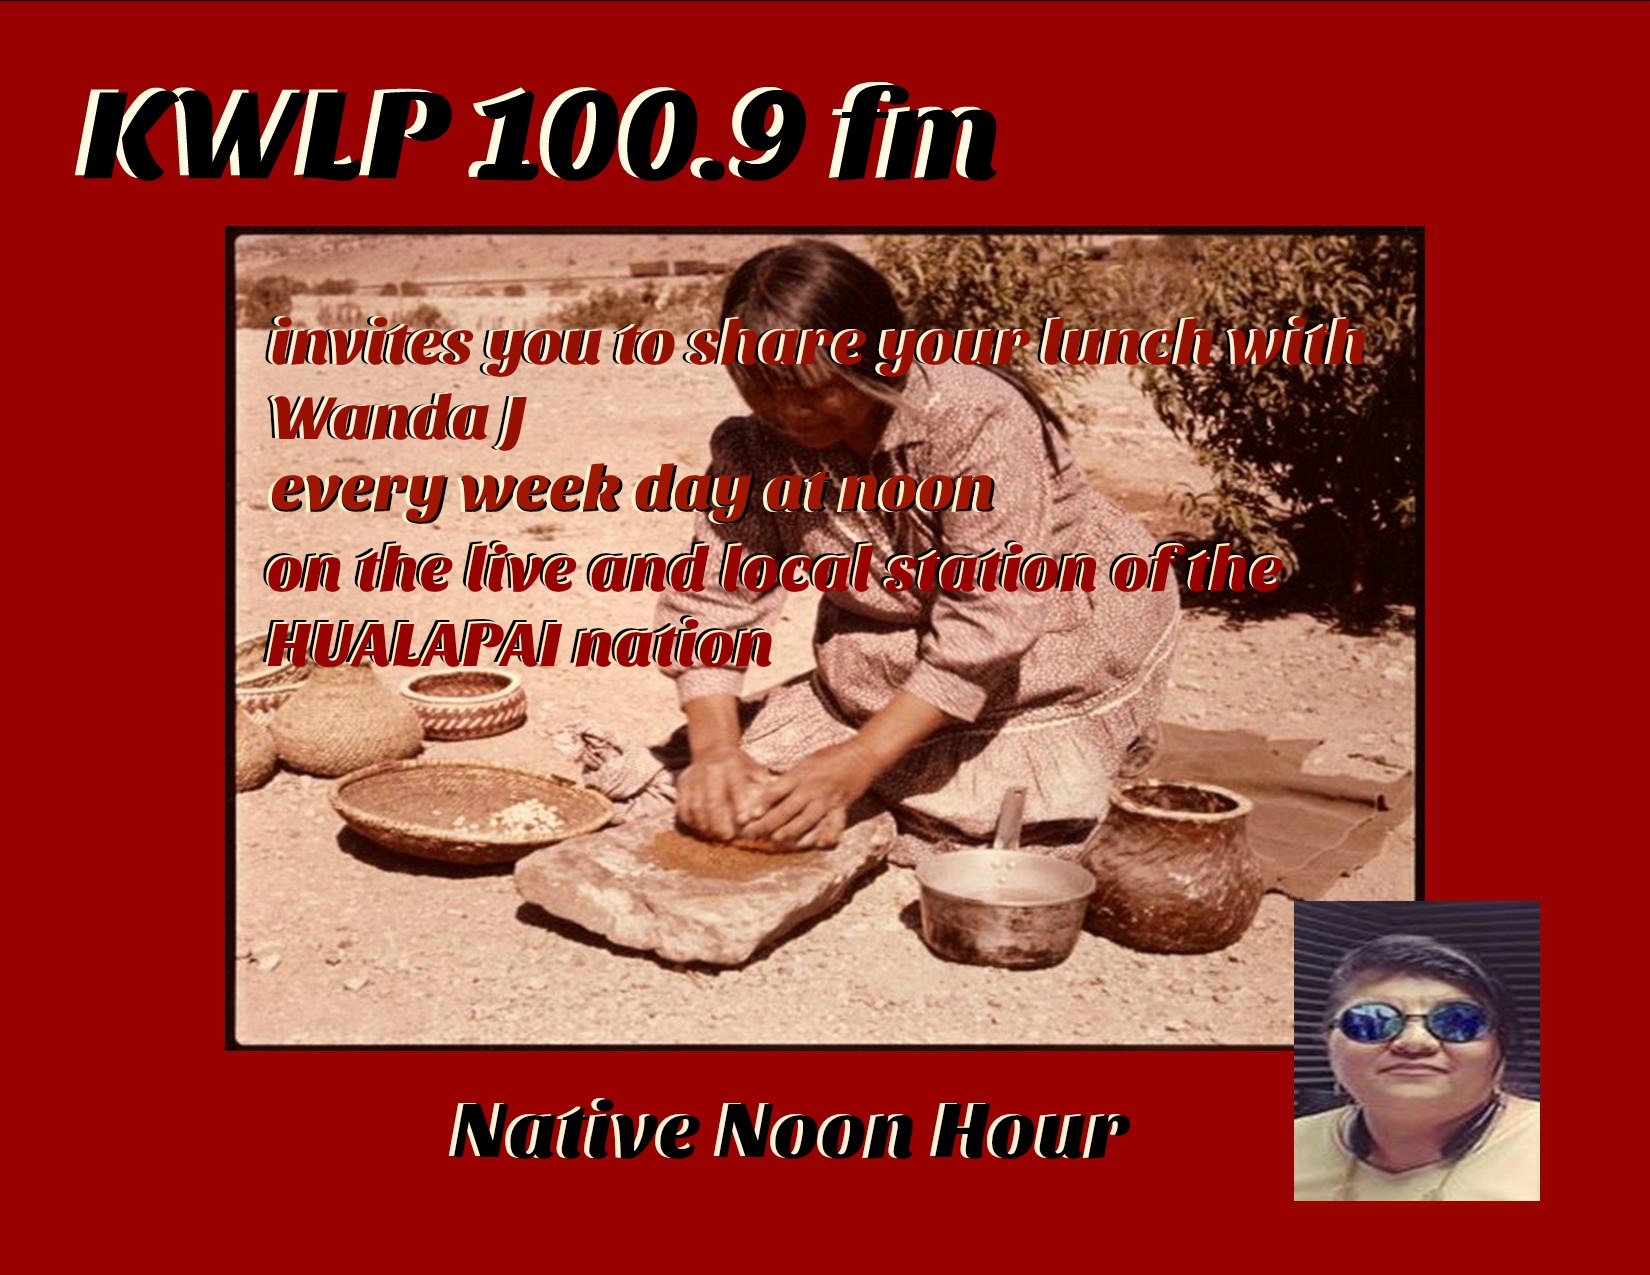 Native Noon Hour sponsored by Robyn and Jess